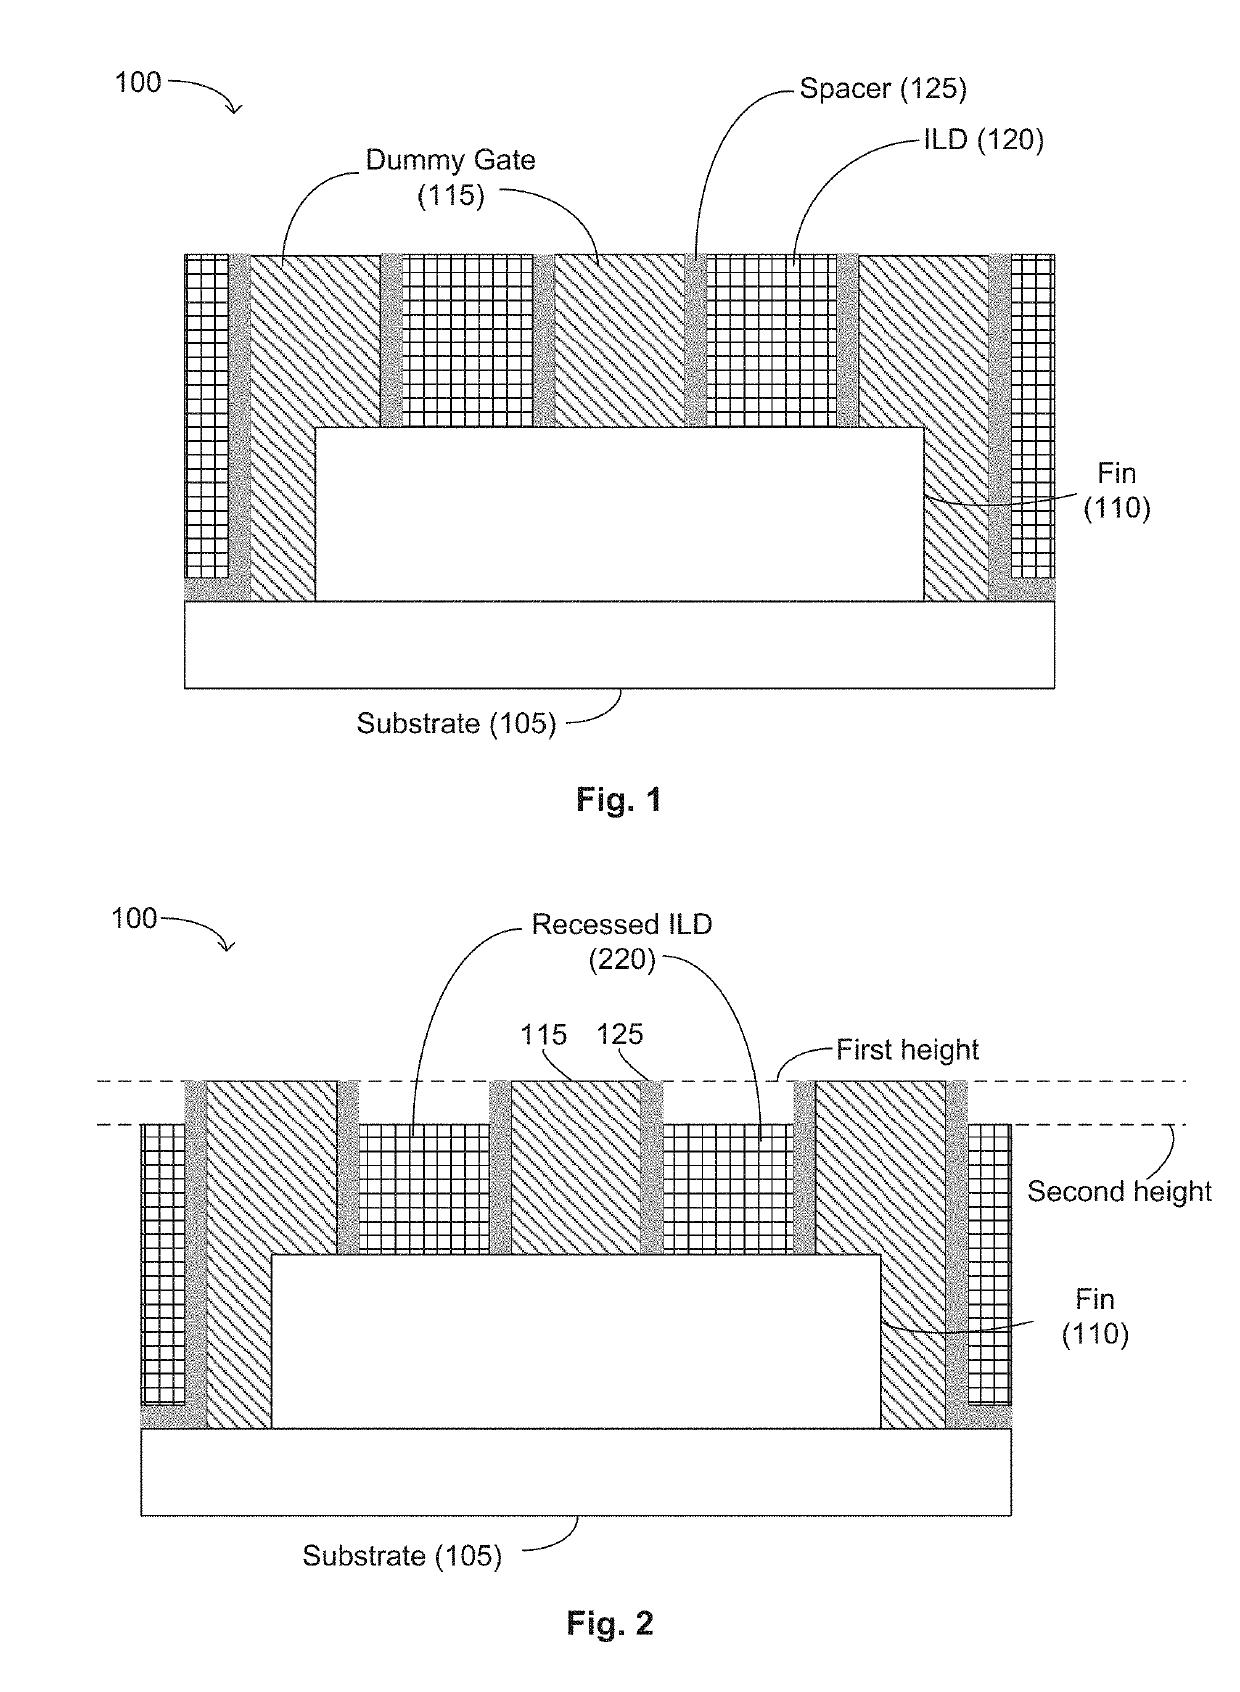 Methods, apparatus, and system for reducing gate cut gouging and/or gate height loss in semiconductor devices